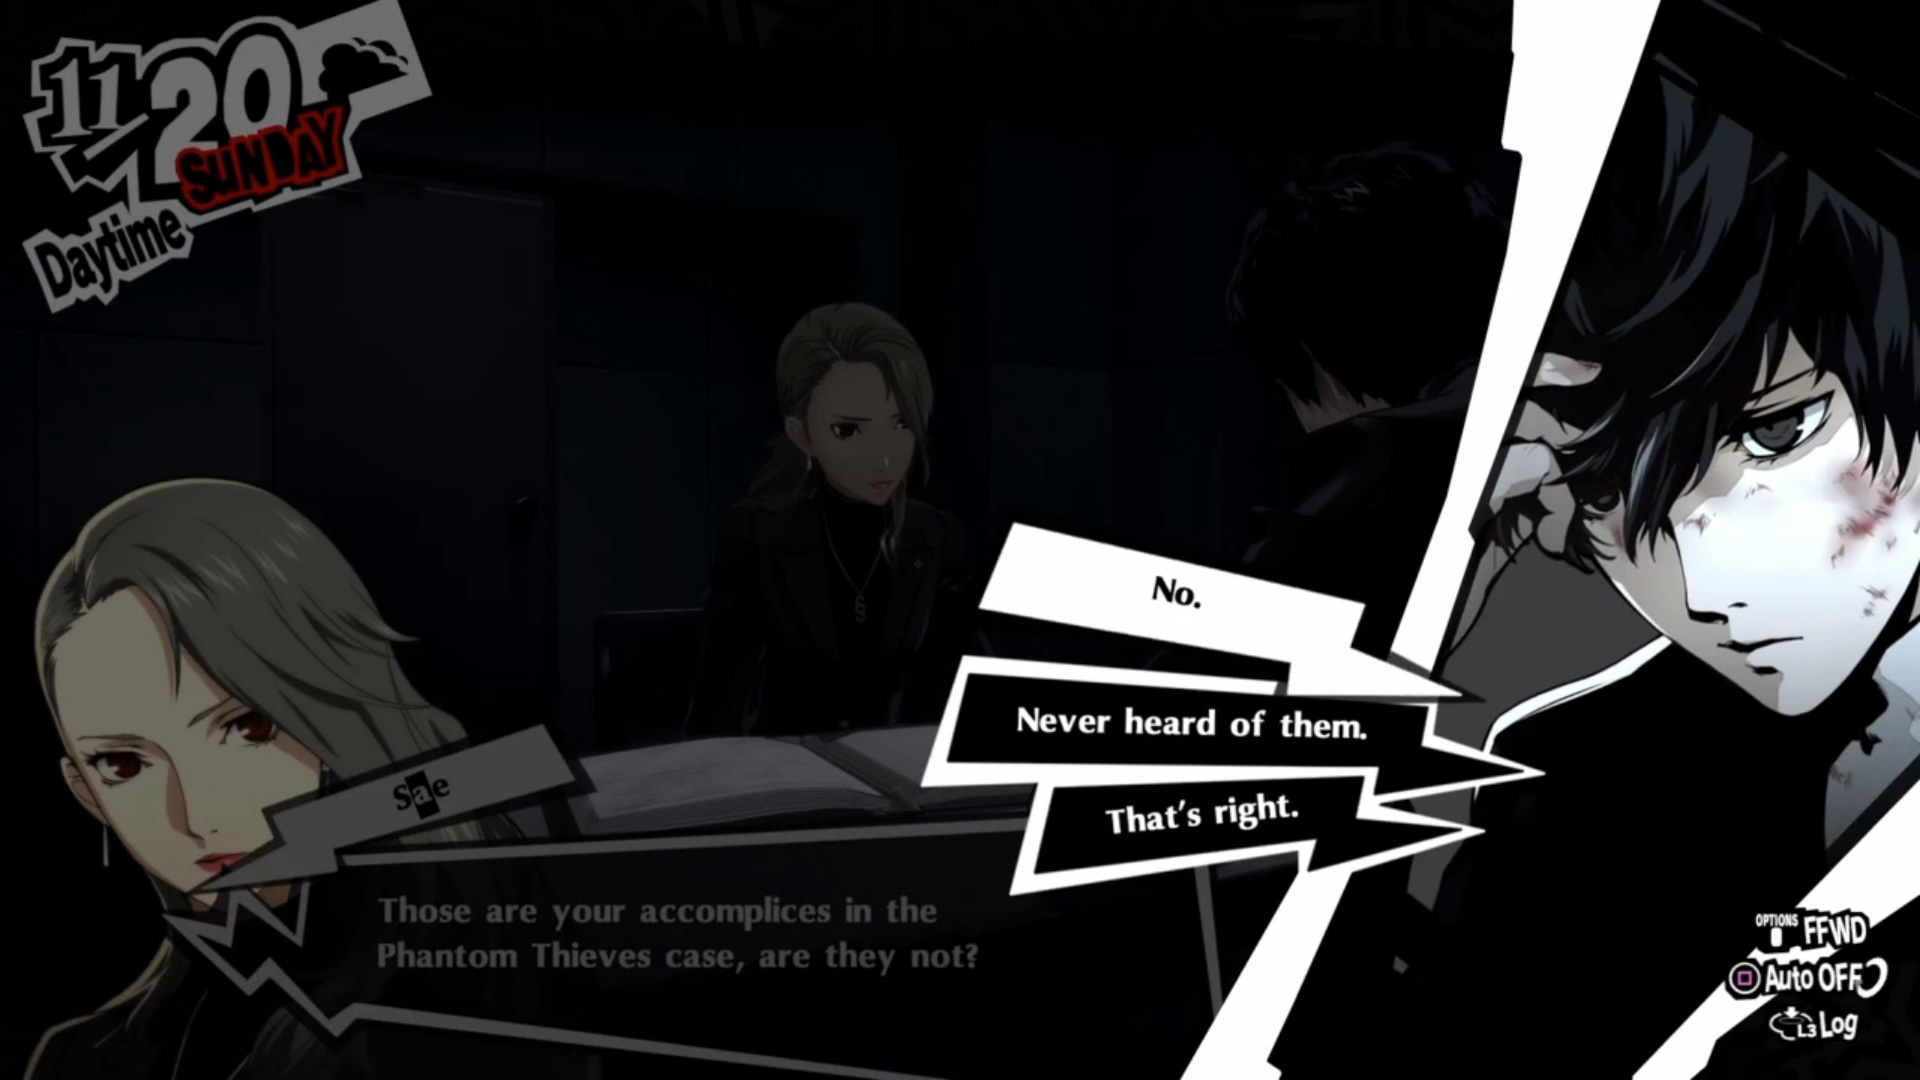 Persona 5 Royal Endings guide: Interrogation Answers & how to get the True  Ending